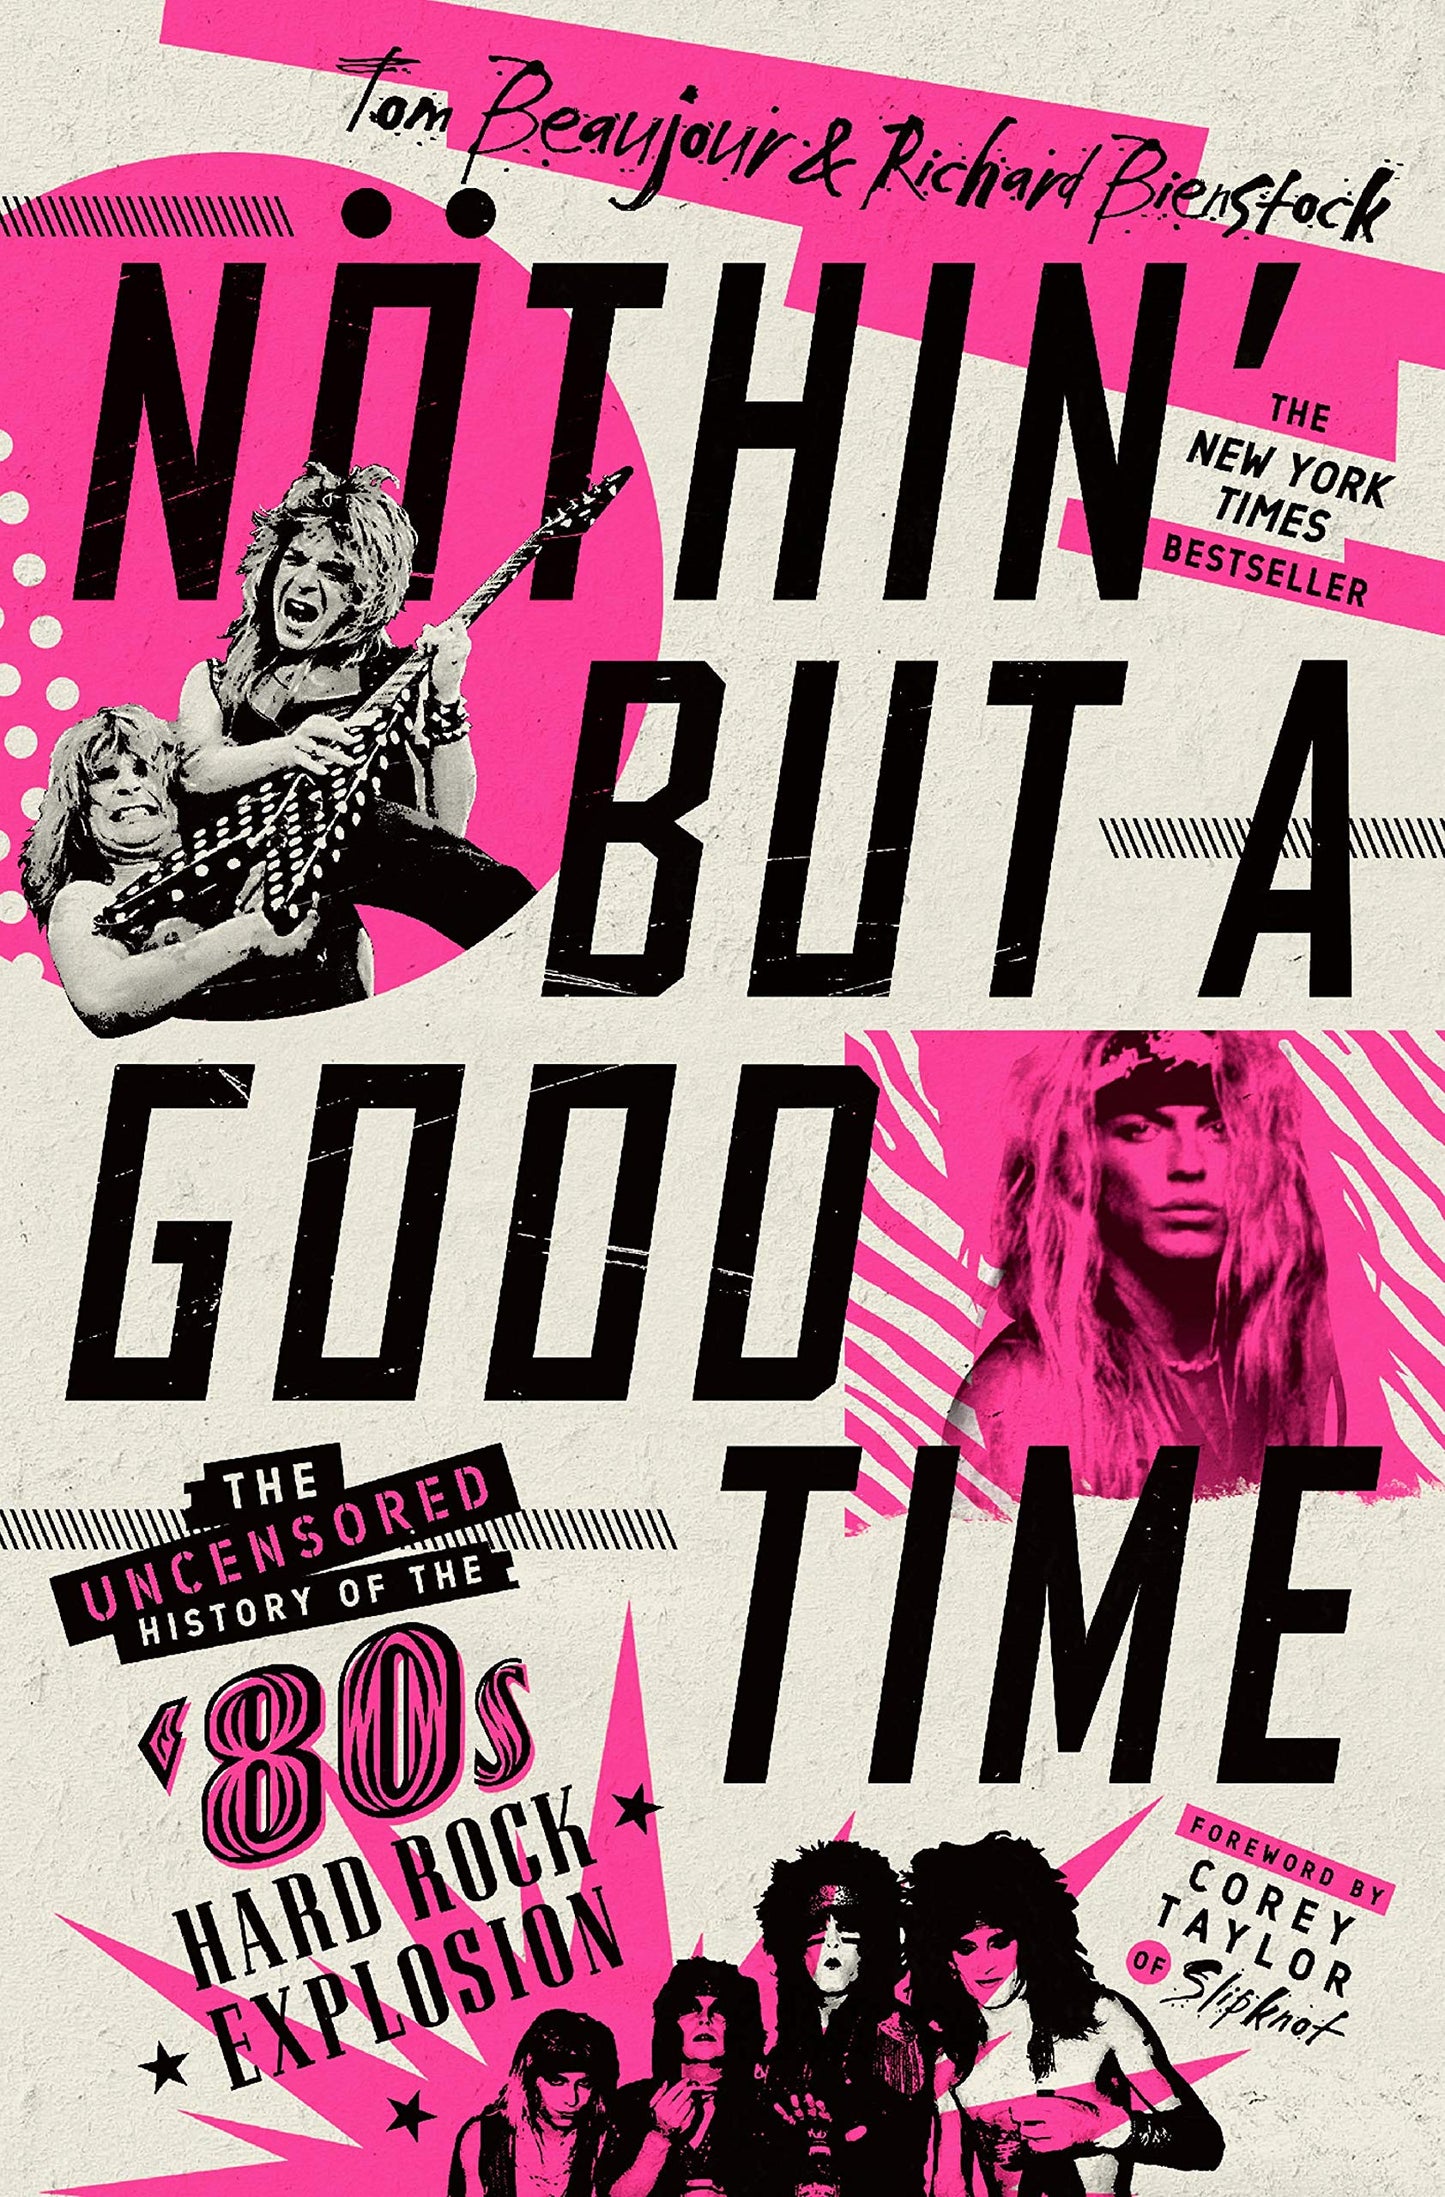 NOTHIN' BUT A GOOD TIME: THE UNCENSORED HISTORY OF THE '80s HARD ROCK EXPLOSION - PAPERBACK - BOOK